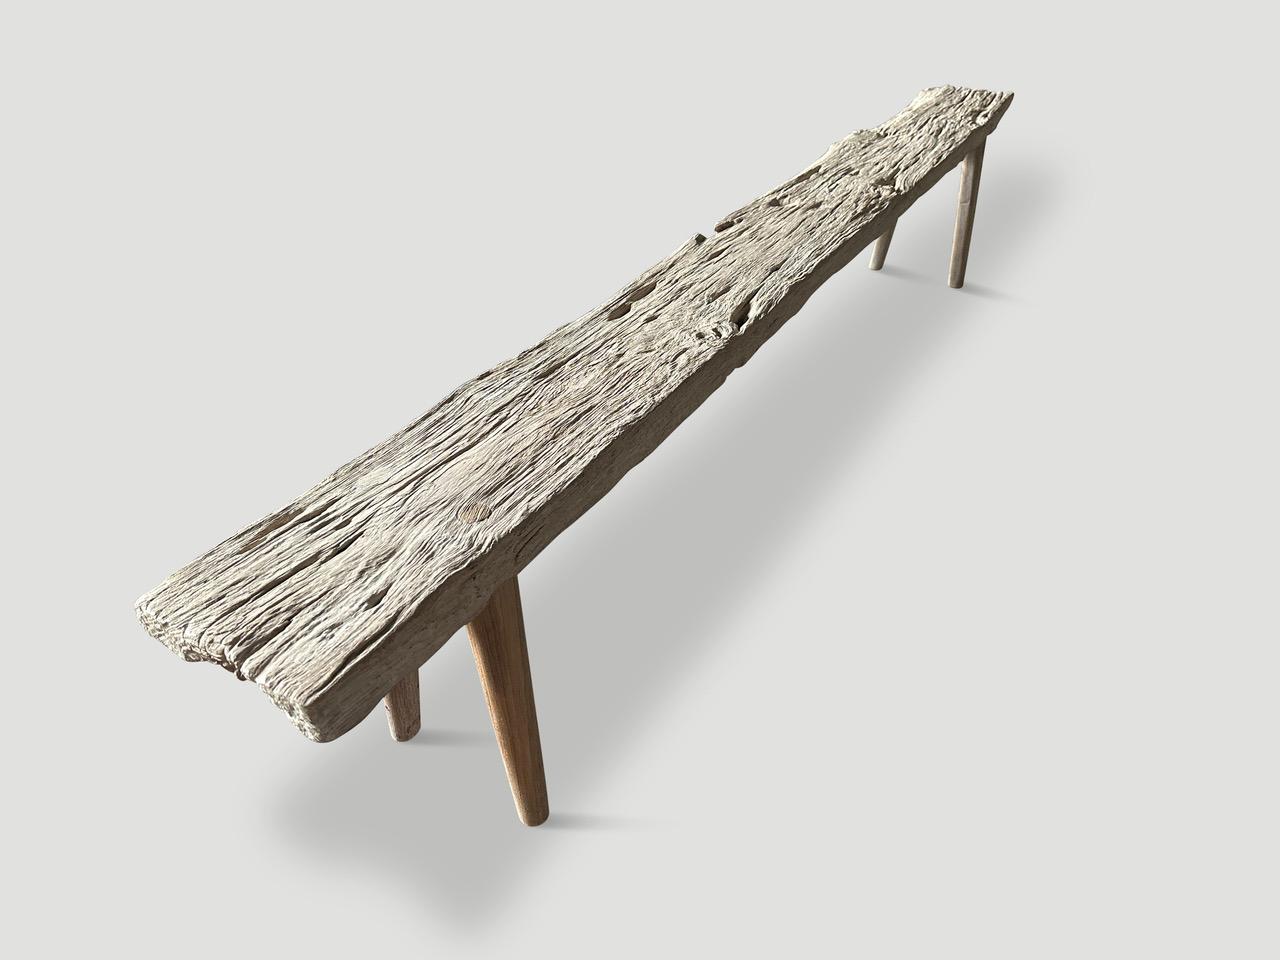 Andrianna Shamaris St. Barts Long Teak Wood Bench In Excellent Condition For Sale In New York, NY